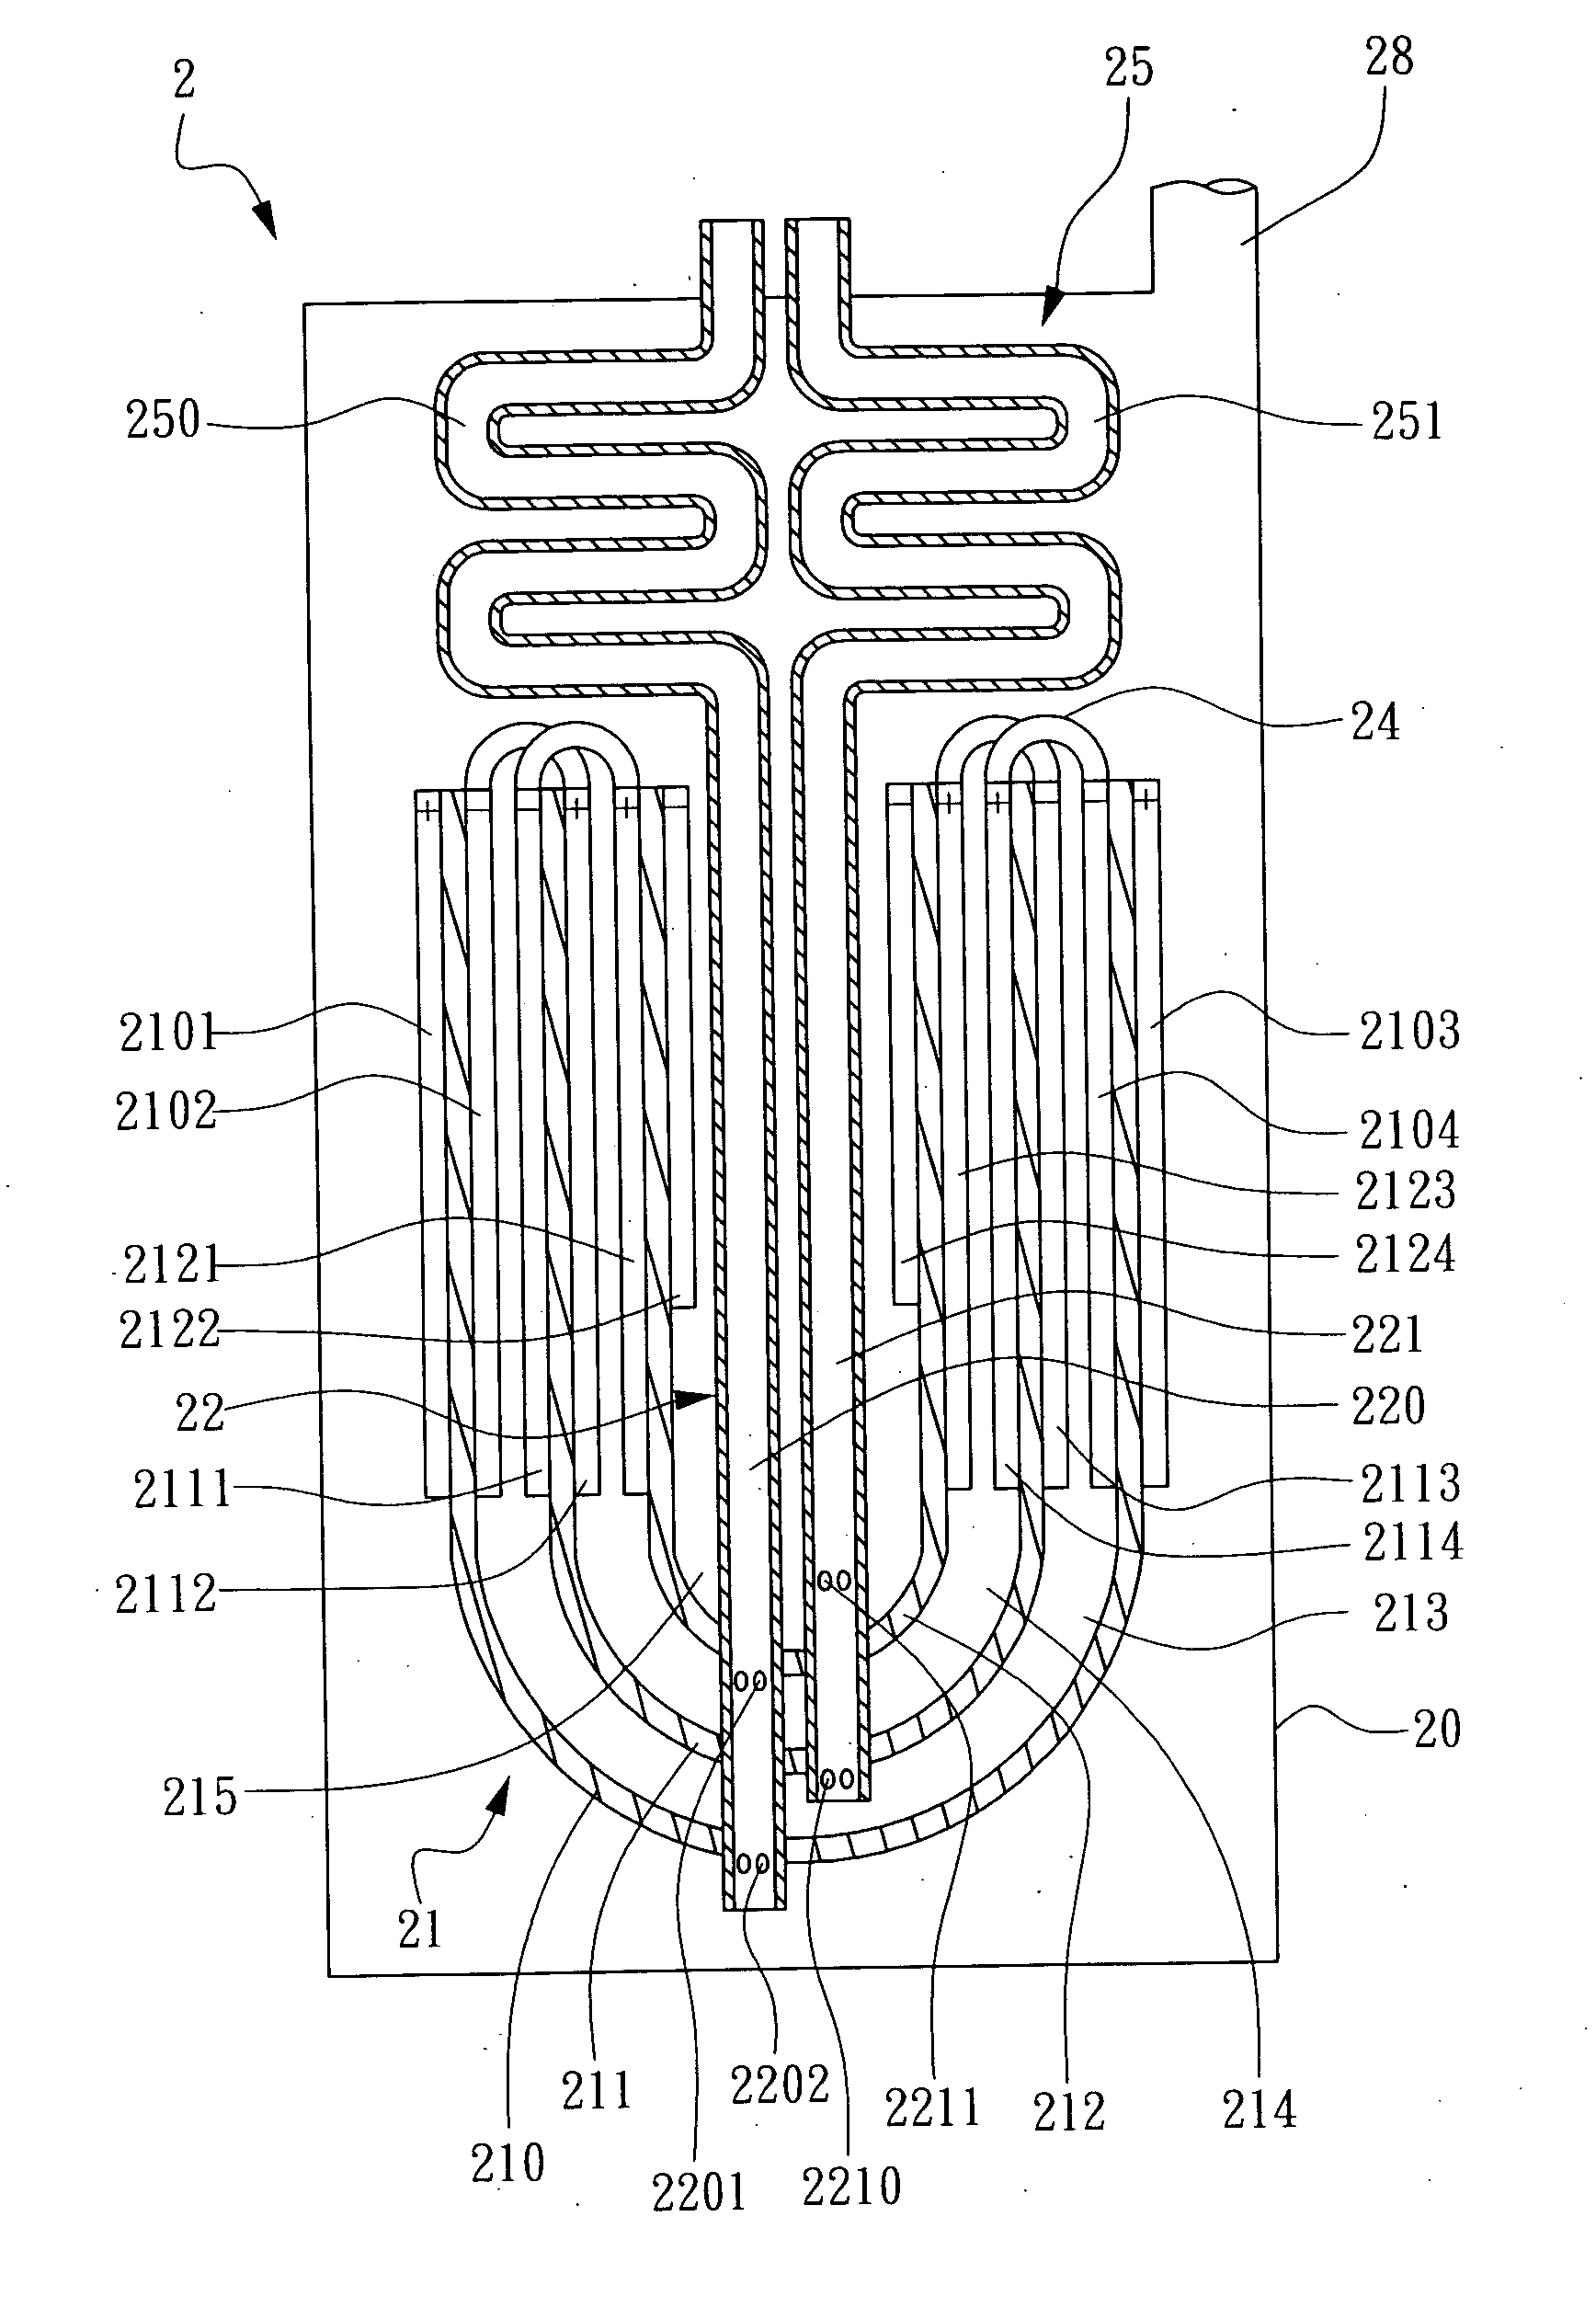 Solid oxide fuel cell of multiple tubular electrodes